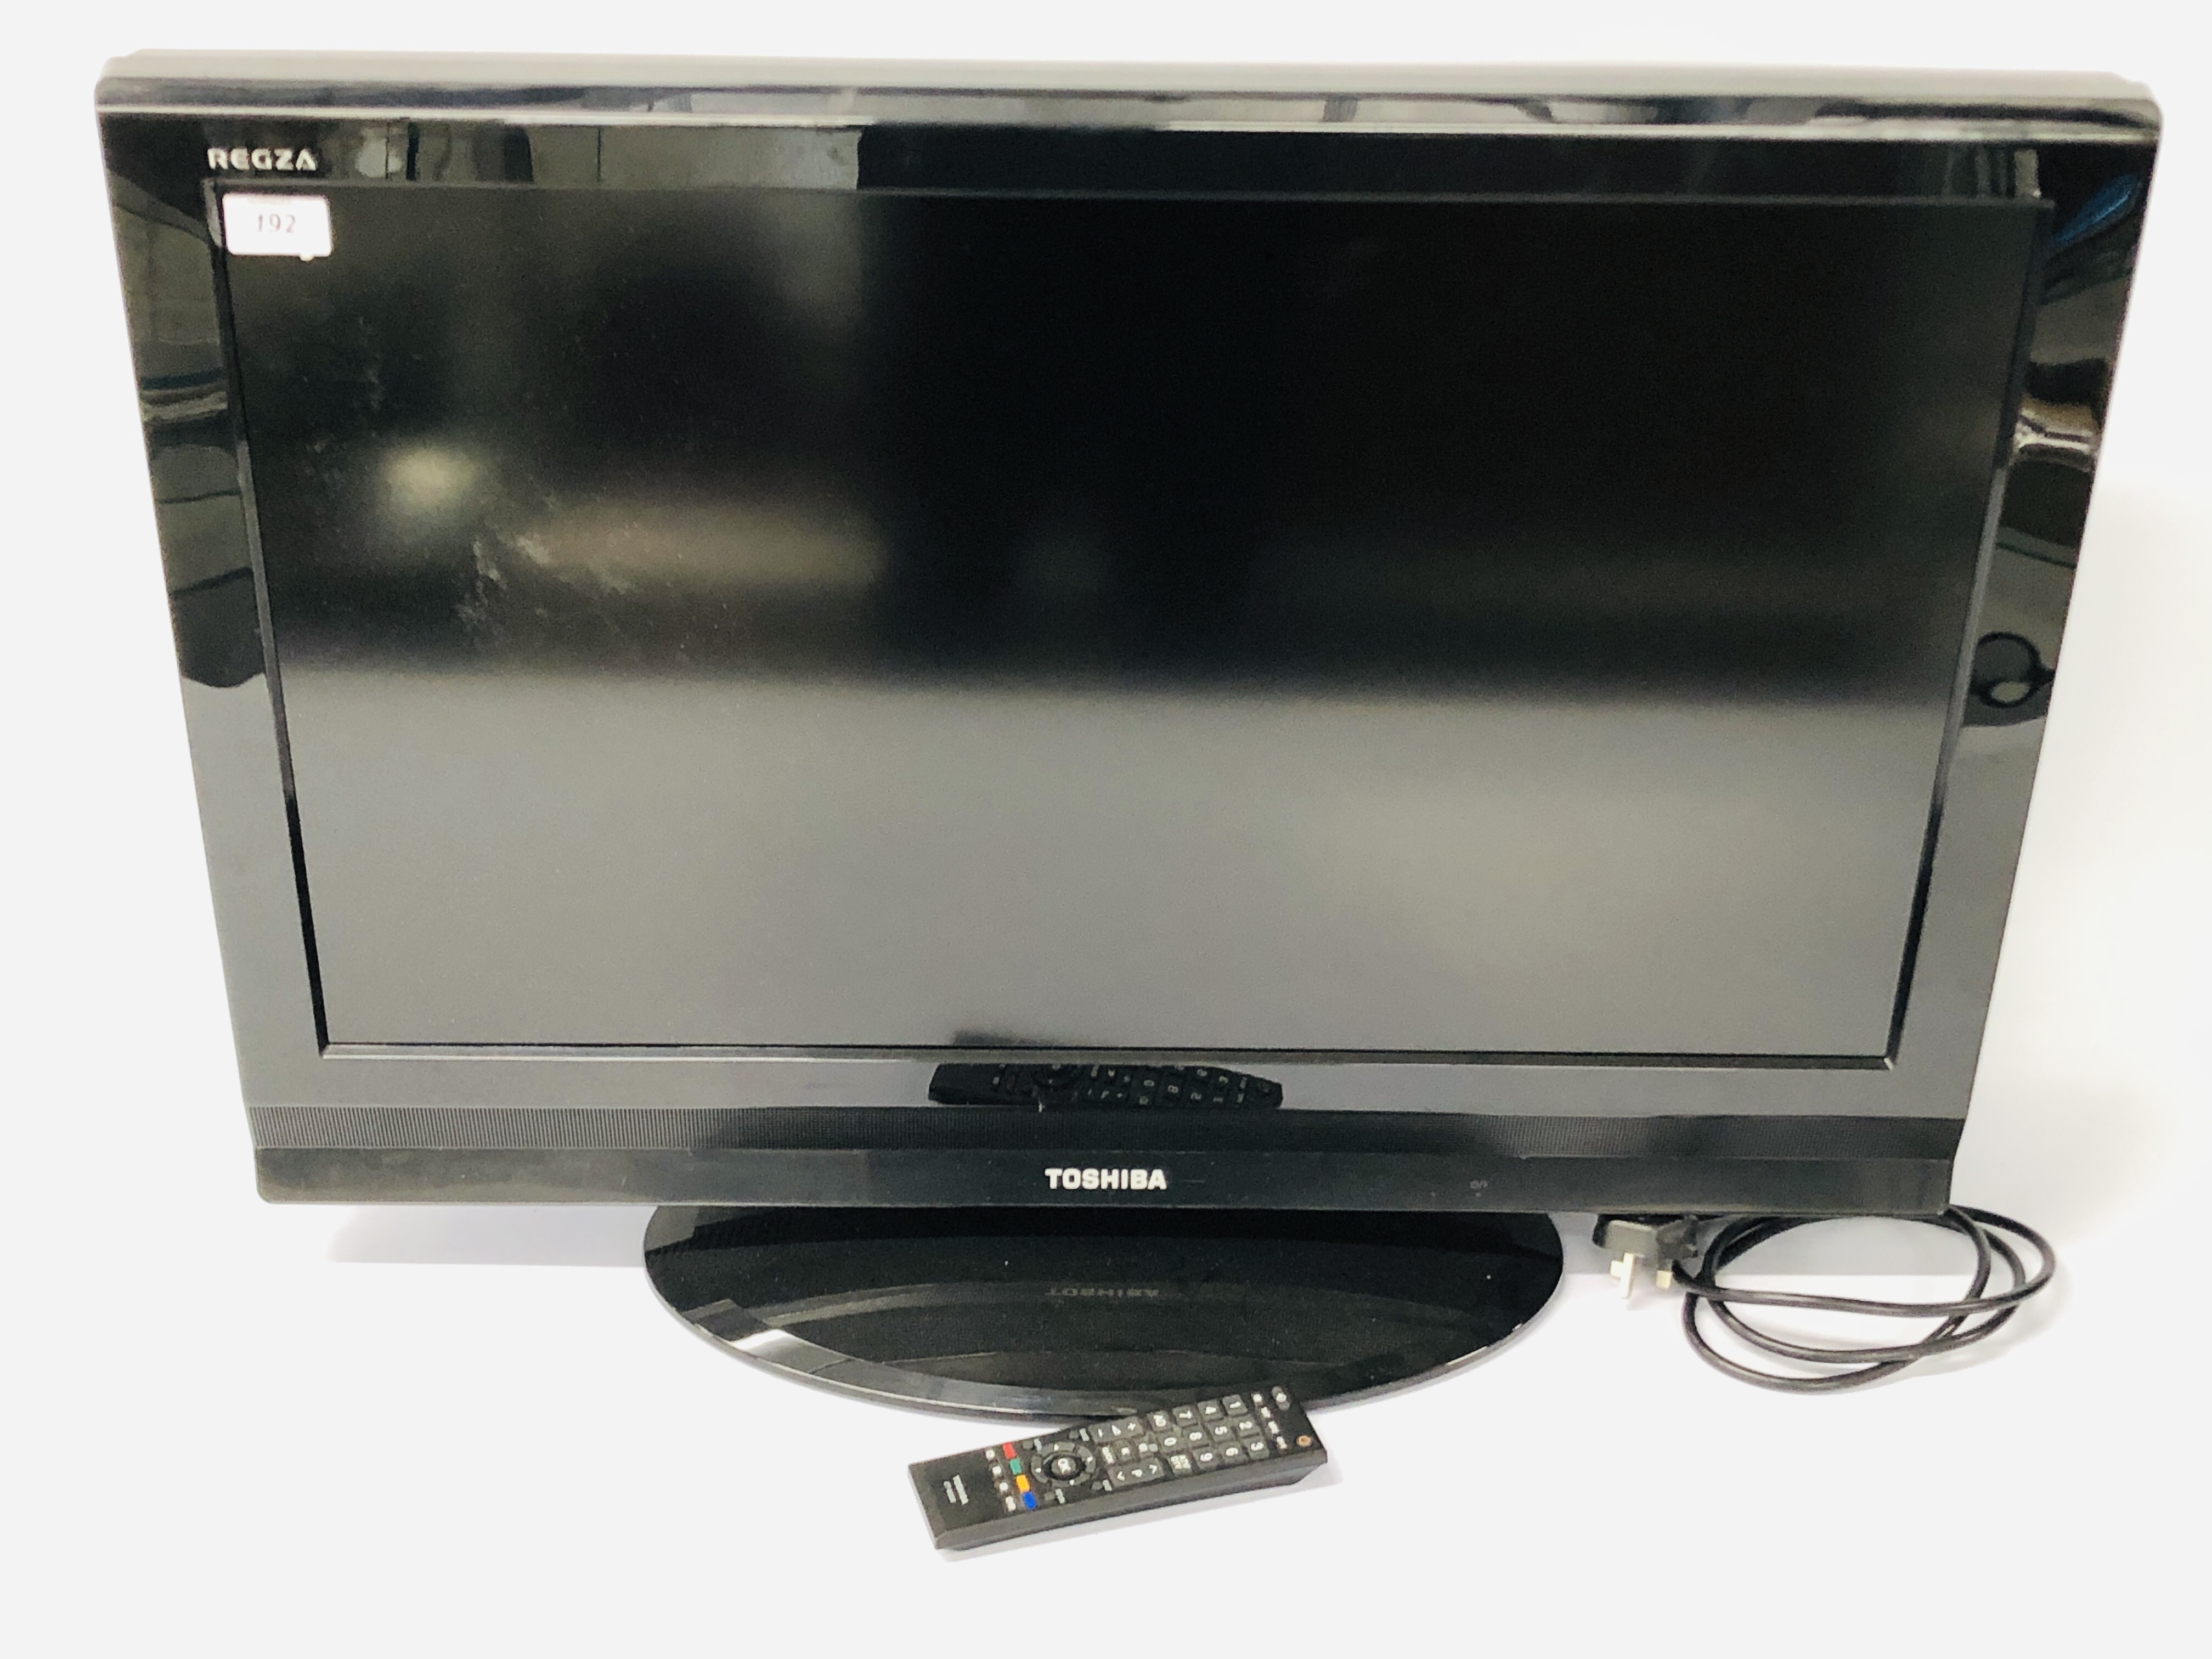 A TOSHIBA REGZA 32 INCH COLOUR LCD TV WITH REMOTE - SOLD AS SEEN